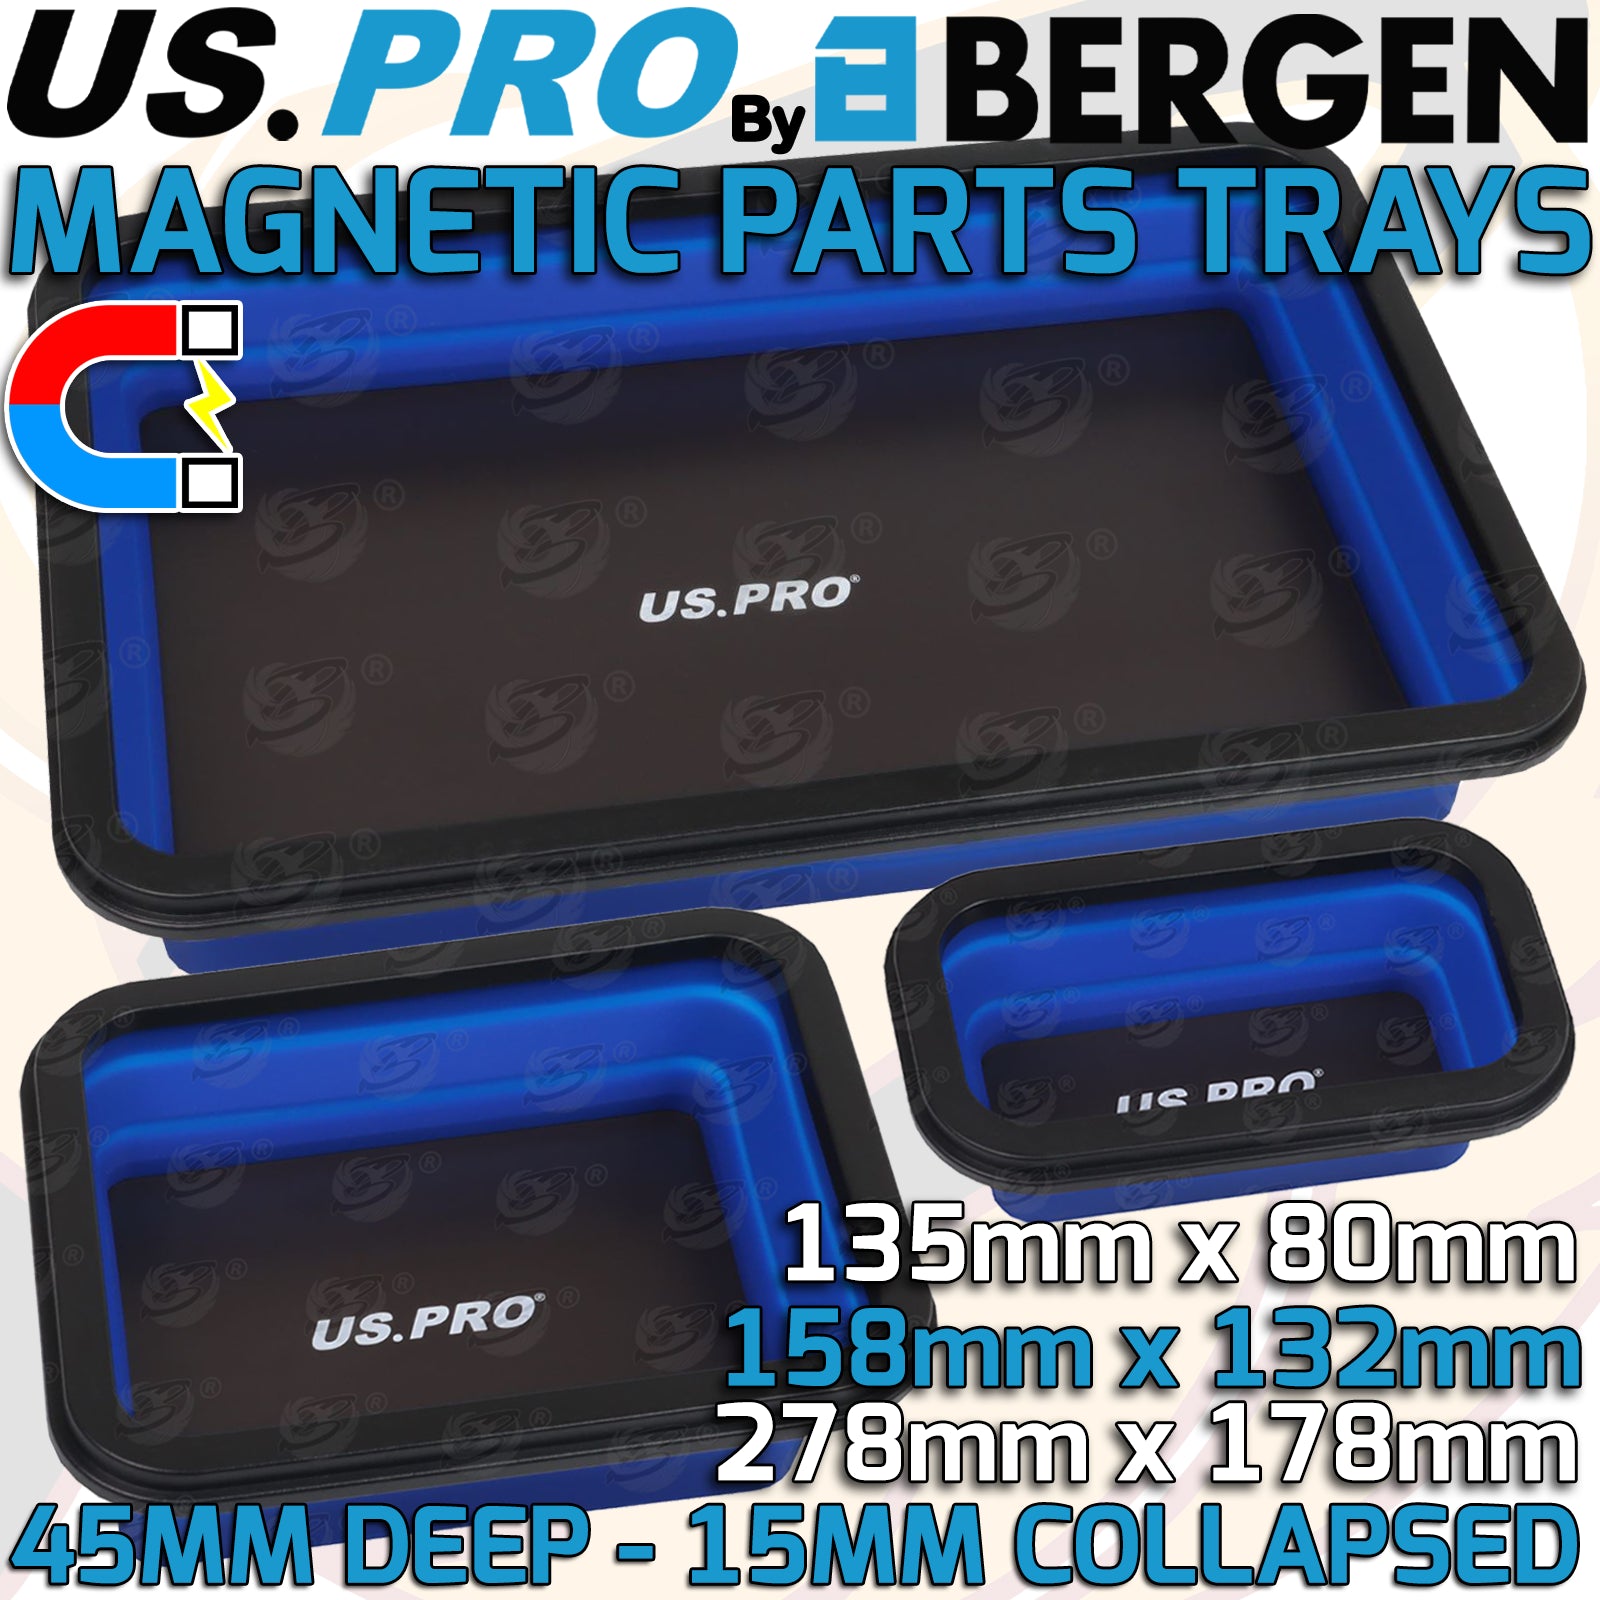 US PRO 3PCS COLLAPSIBLE MAGNETIC PARTS TRAY